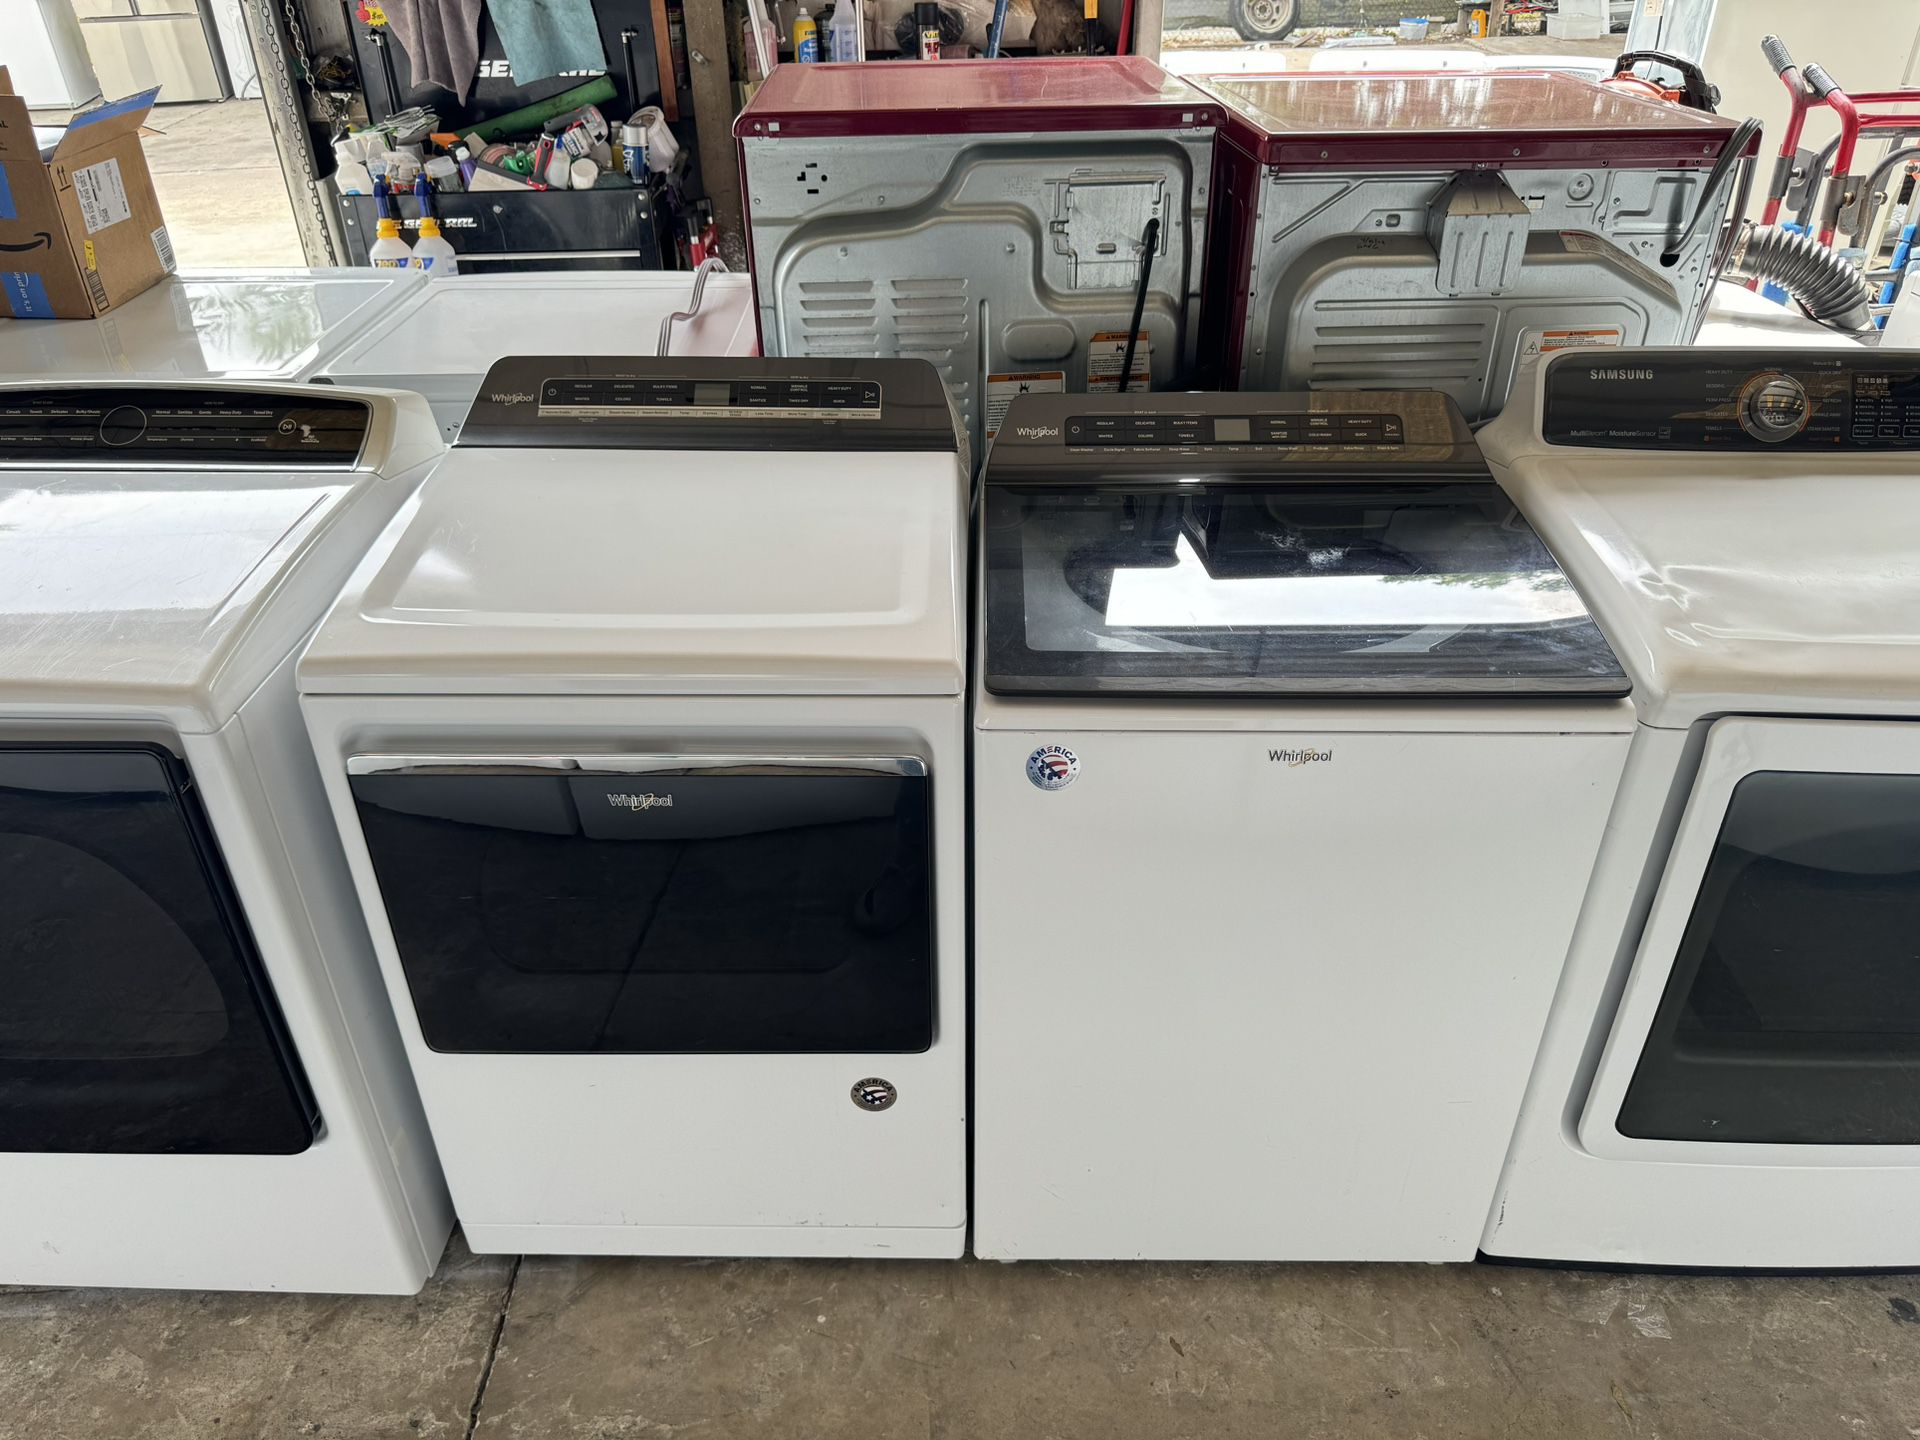 Whirlpool Washer And Dryer Set XL Capacity